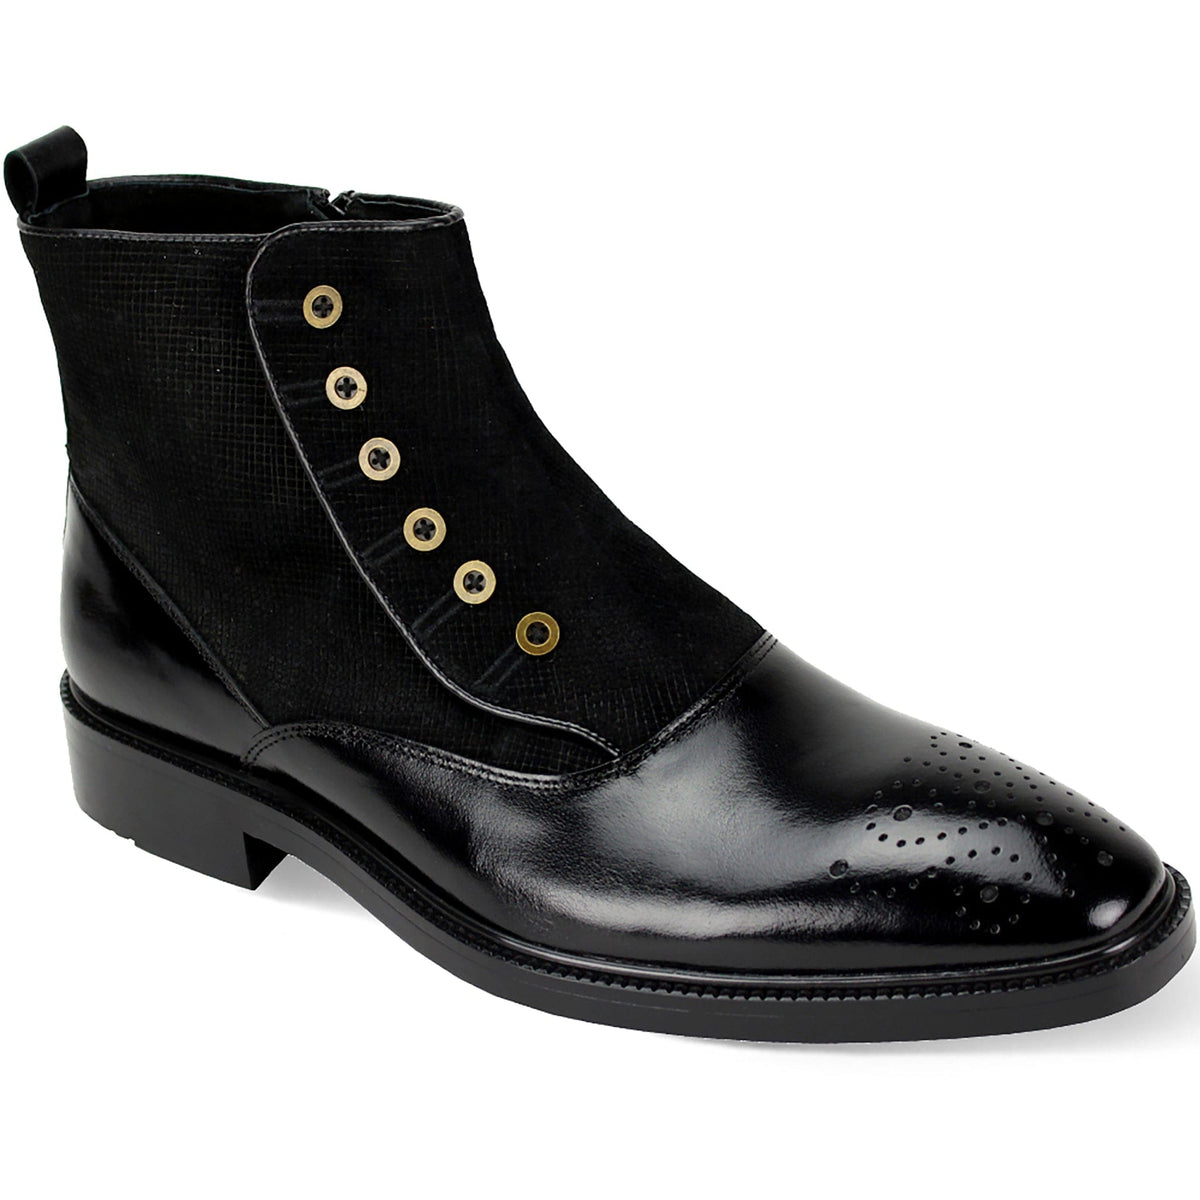 GIOVANNI LEATHER SHOES FT BLACK / 7 GIOVANNI LEATHER SHOES-KENDRICK